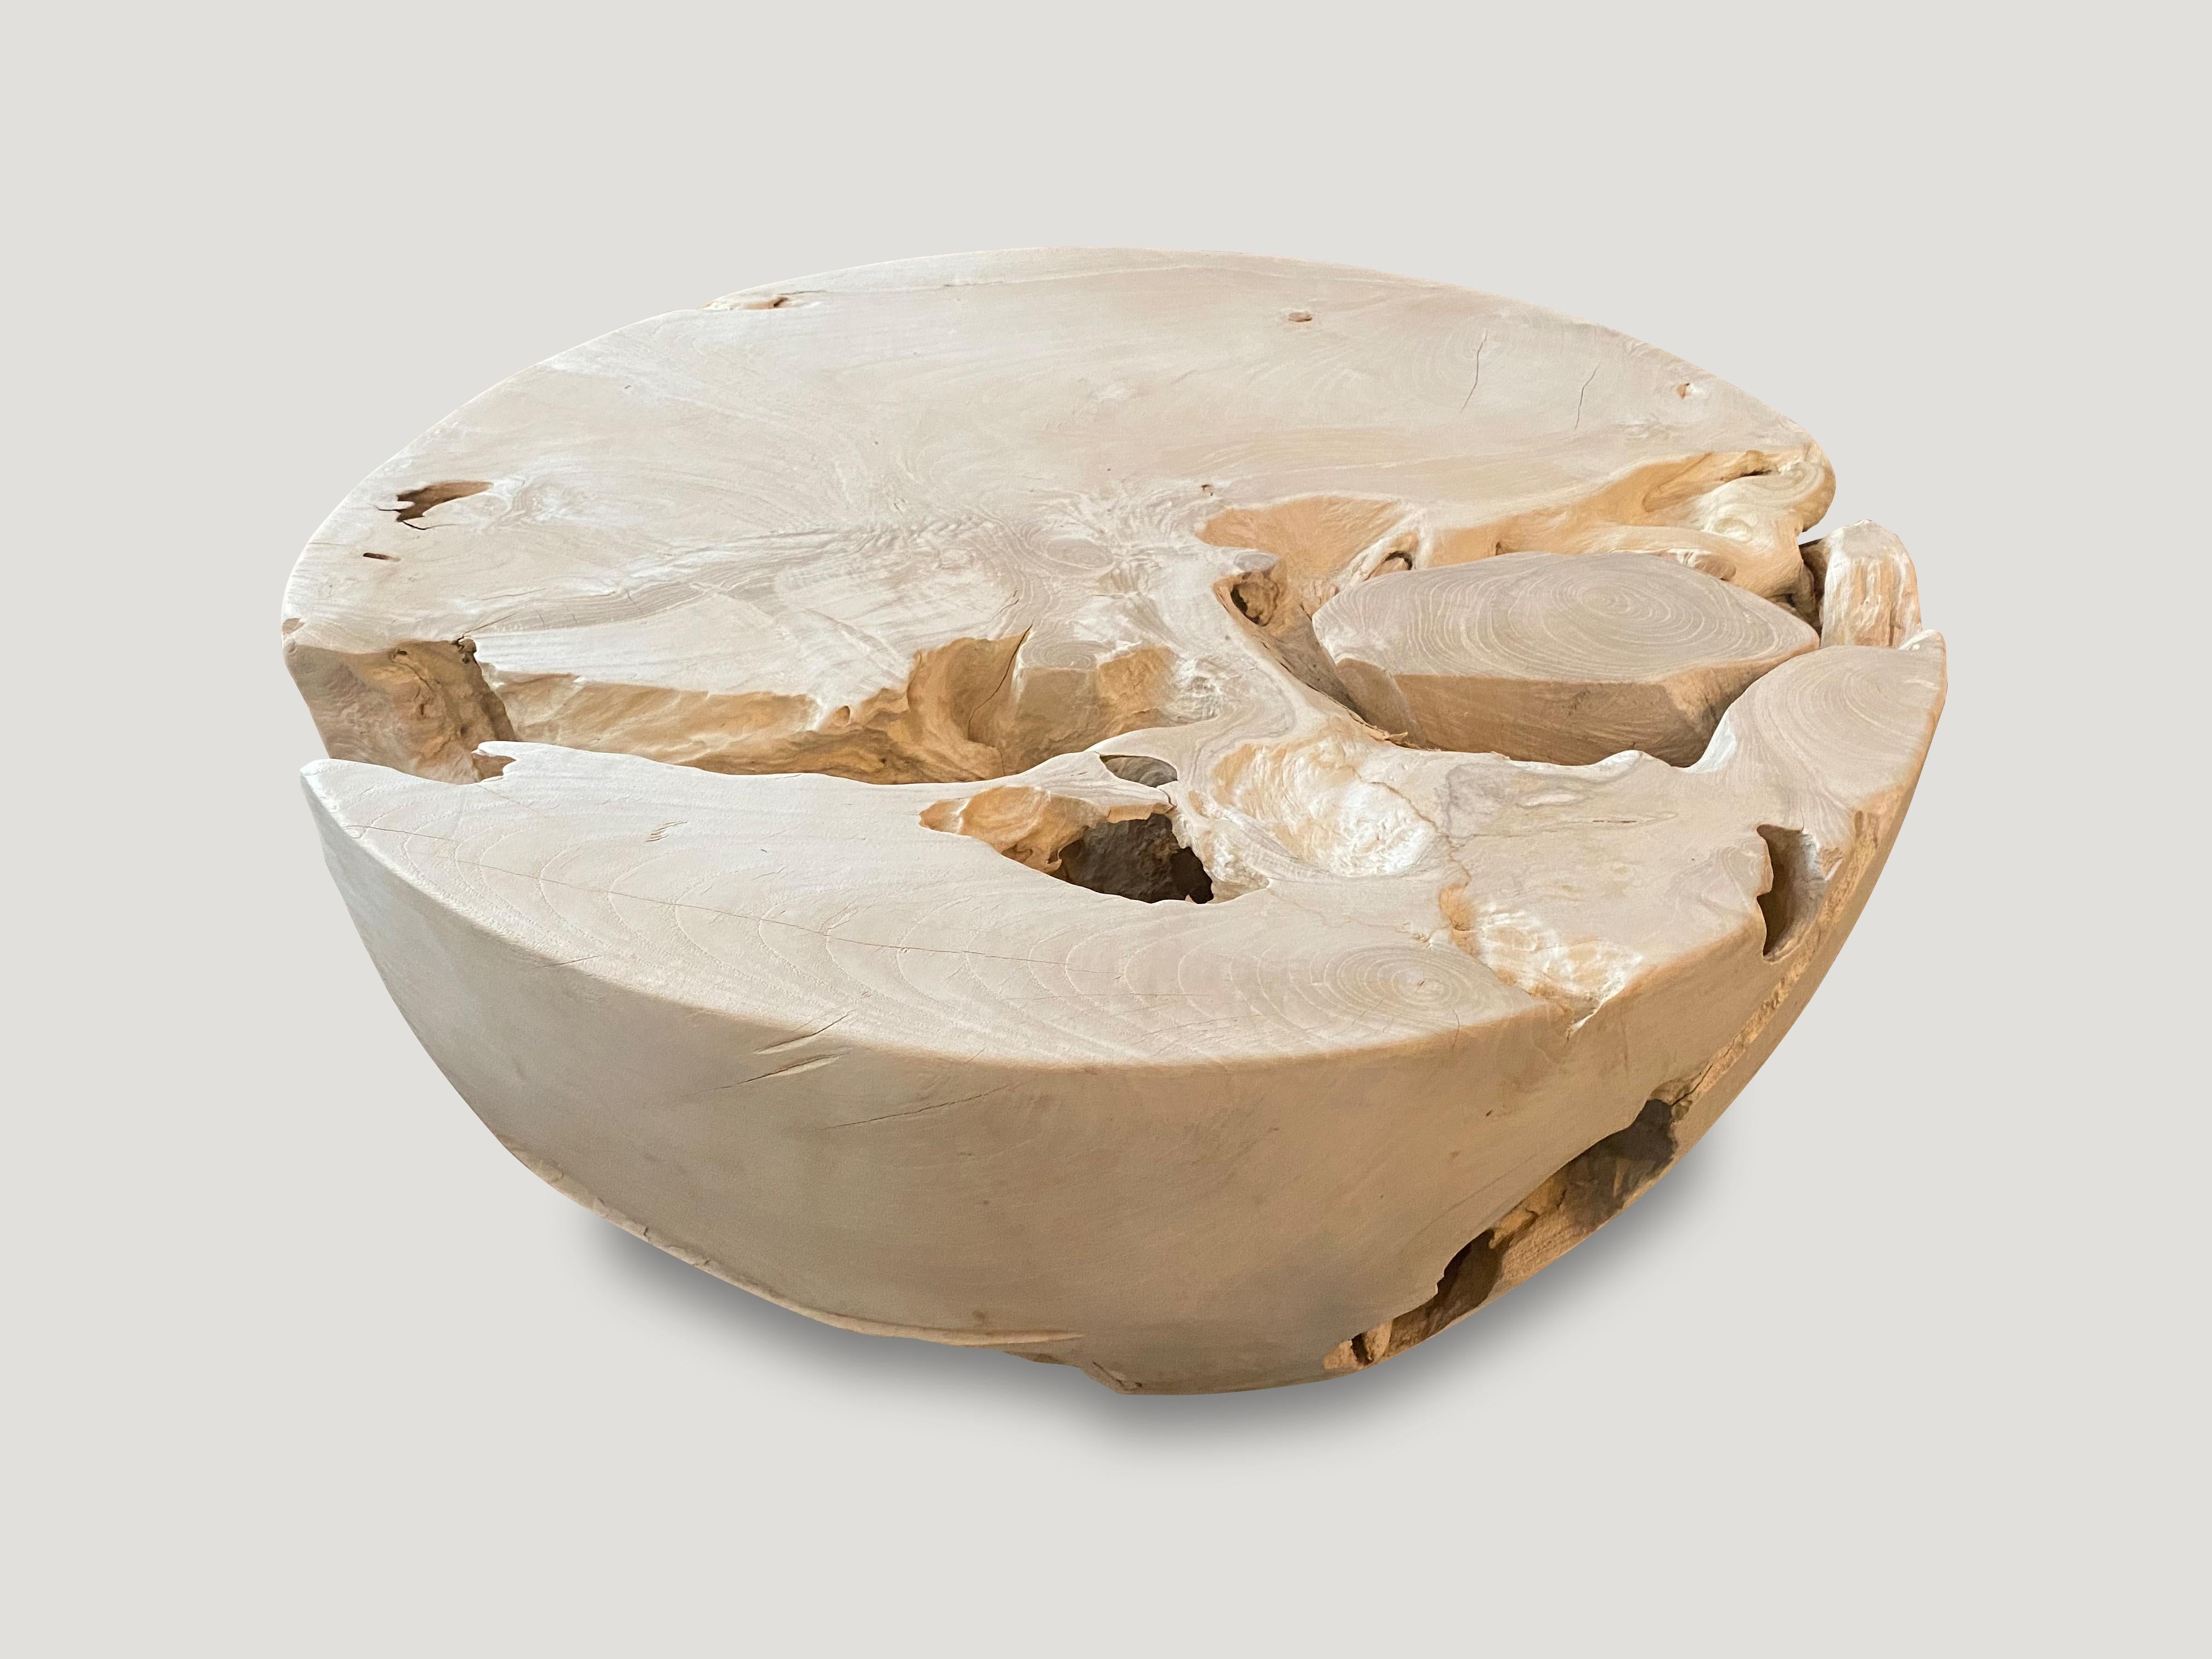 Organic round reclaimed teak wood coffee table, bleached with a light white washed finish. Perfect for inside or outside living. We can also produce this shape charred or natural teak.

The St. Barts collection features an exciting new line of